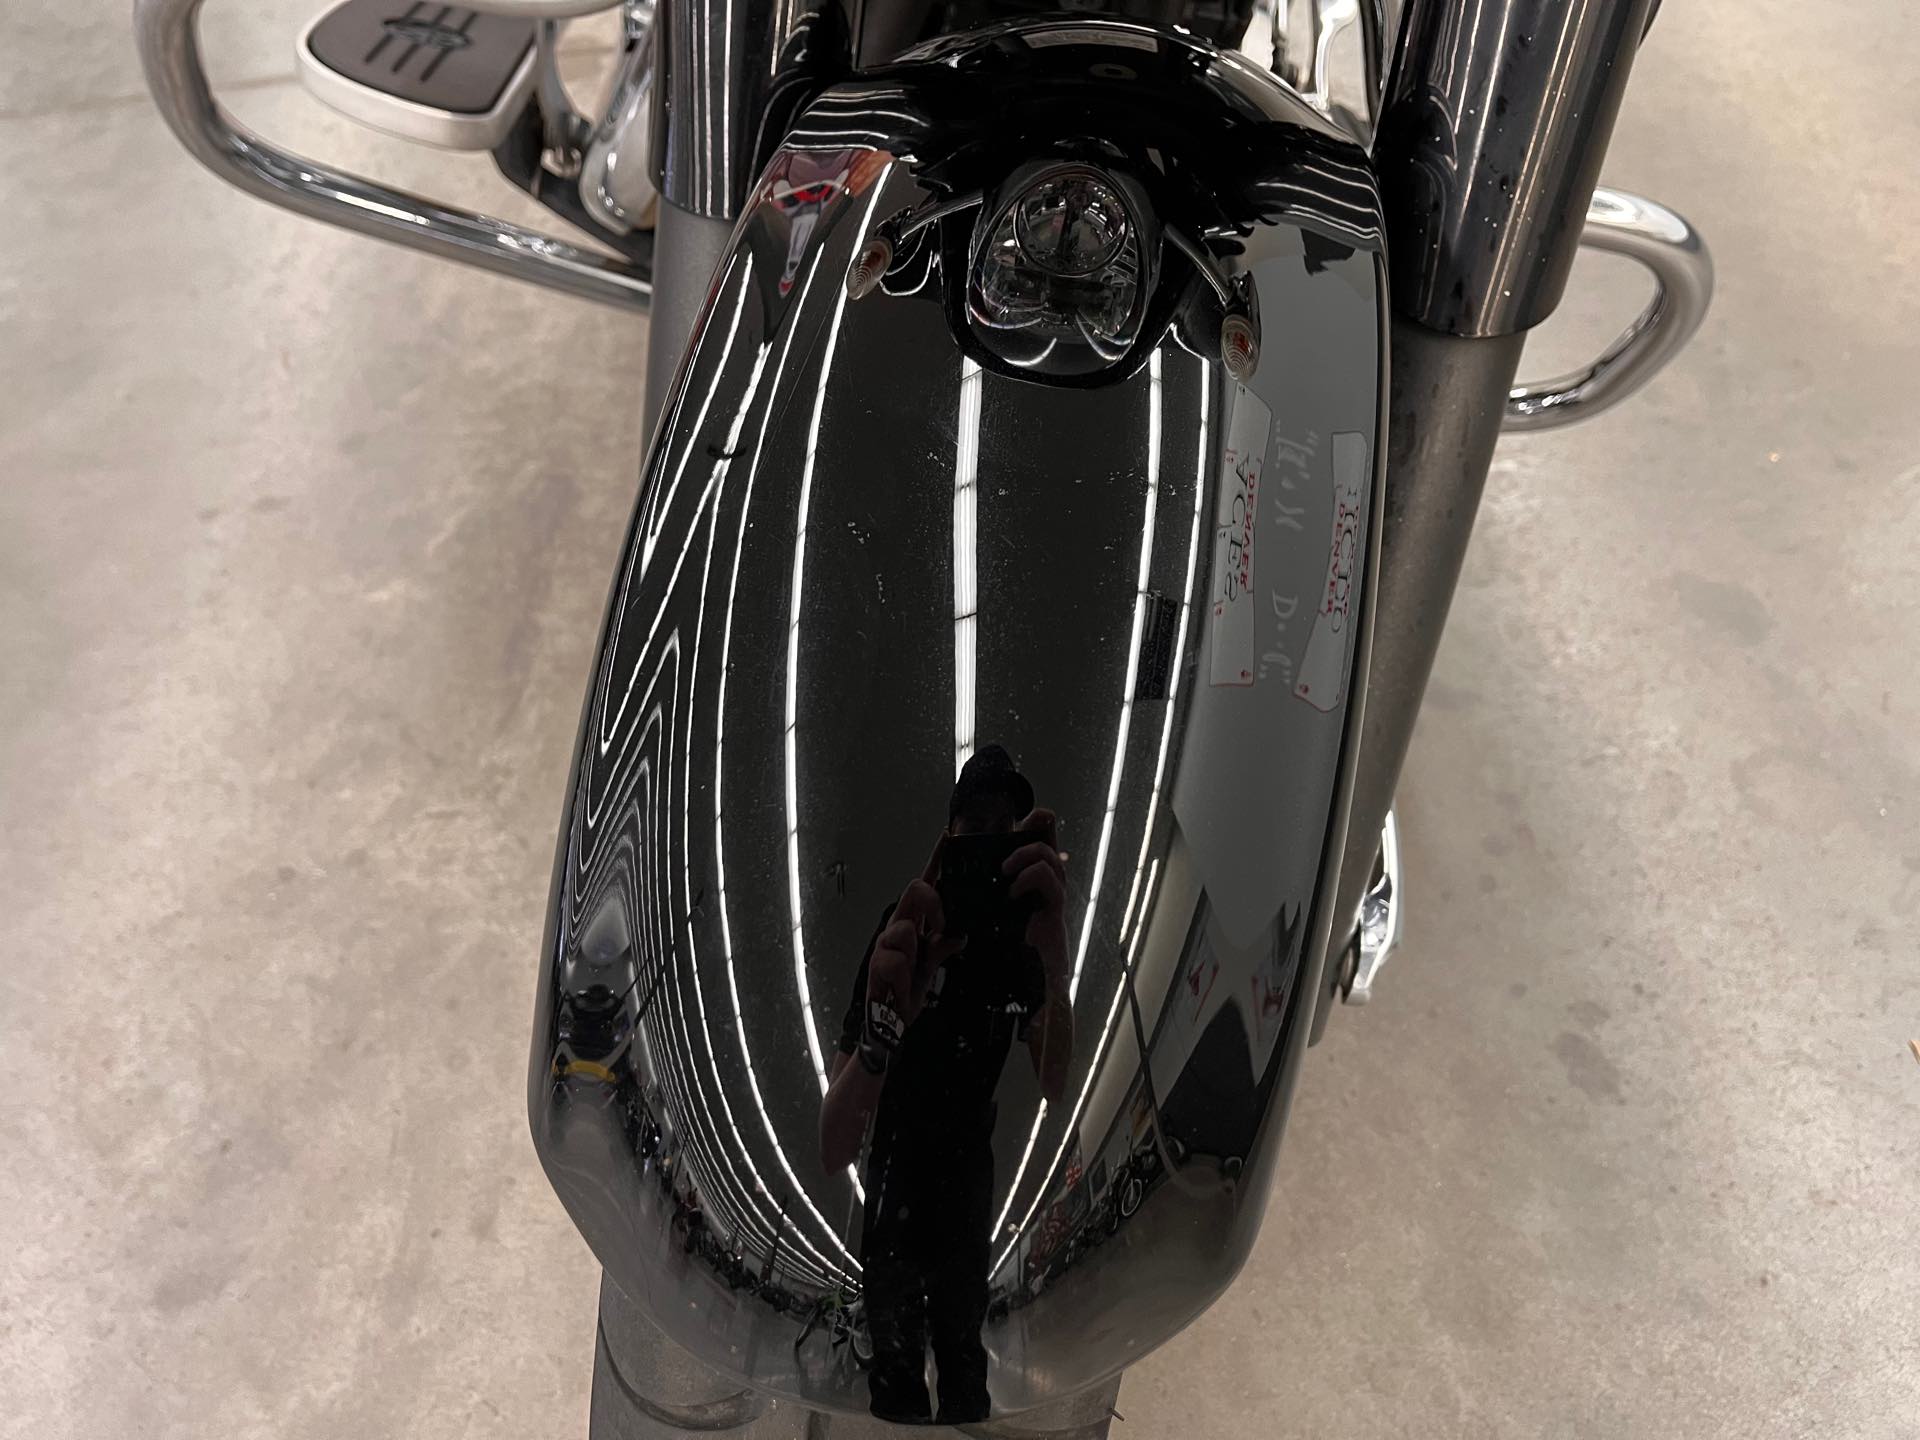 2010 Yamaha Stratoliner Deluxe at Aces Motorcycles - Denver